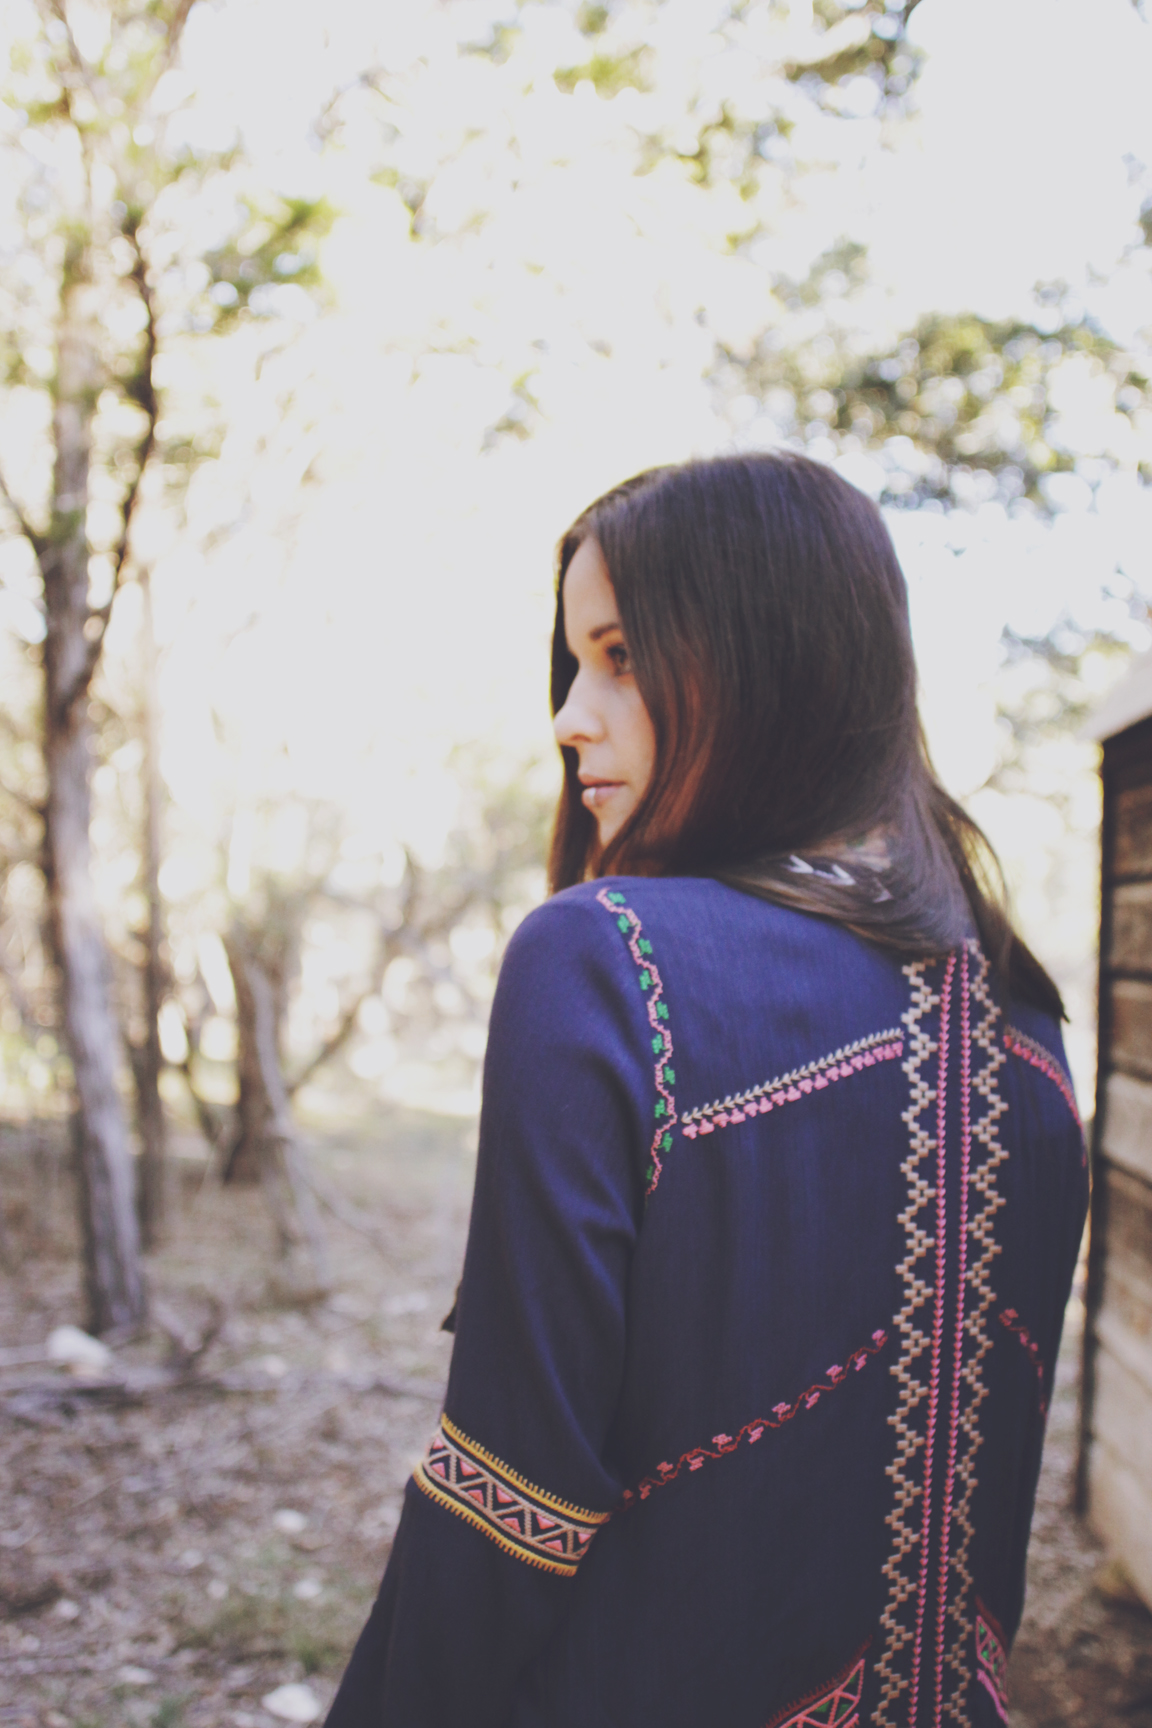 THREADS // NOMAD — Roots & FeathersBlog